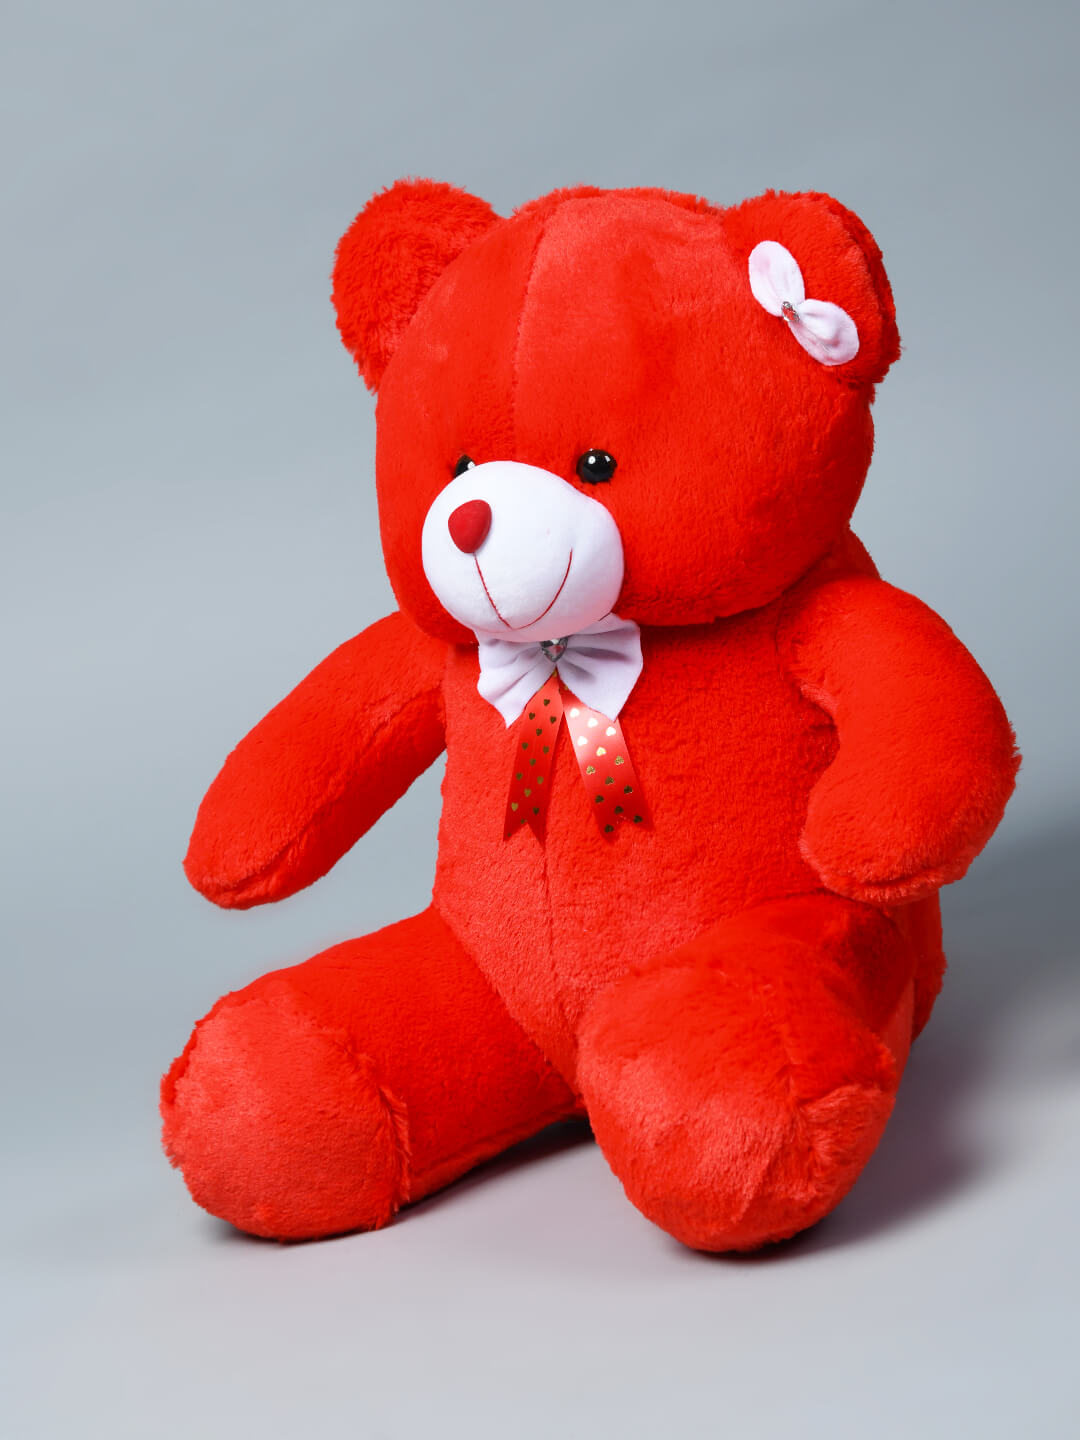 Kwality Dreams Delightful Red Teddy Bear with a Touch of Elegance